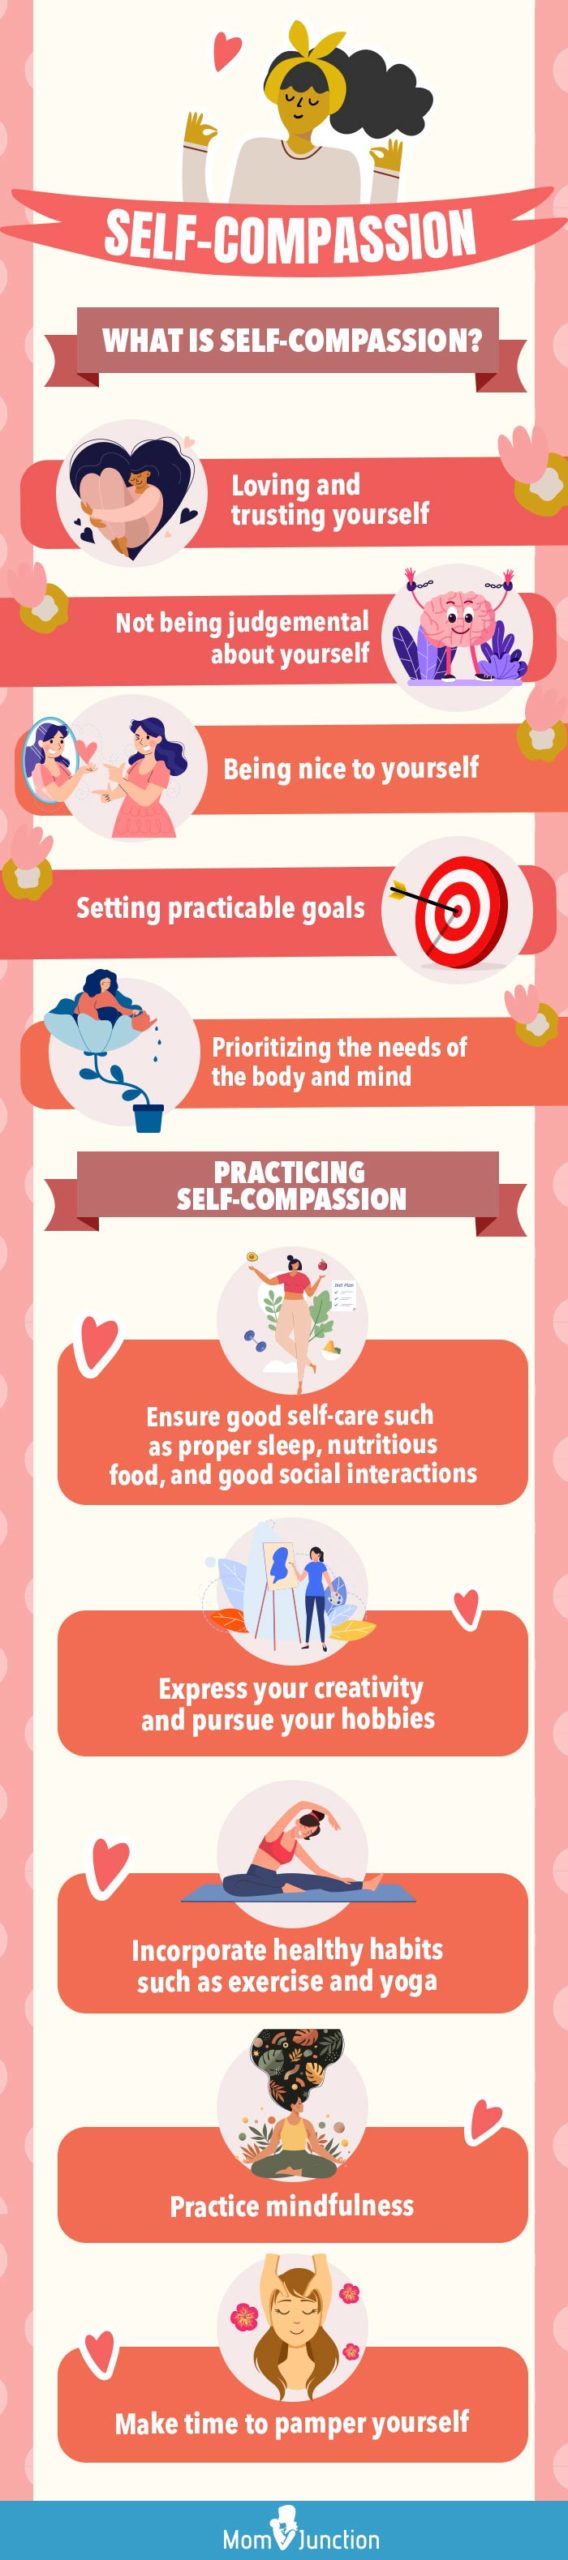 what is self-compassion [infographic]